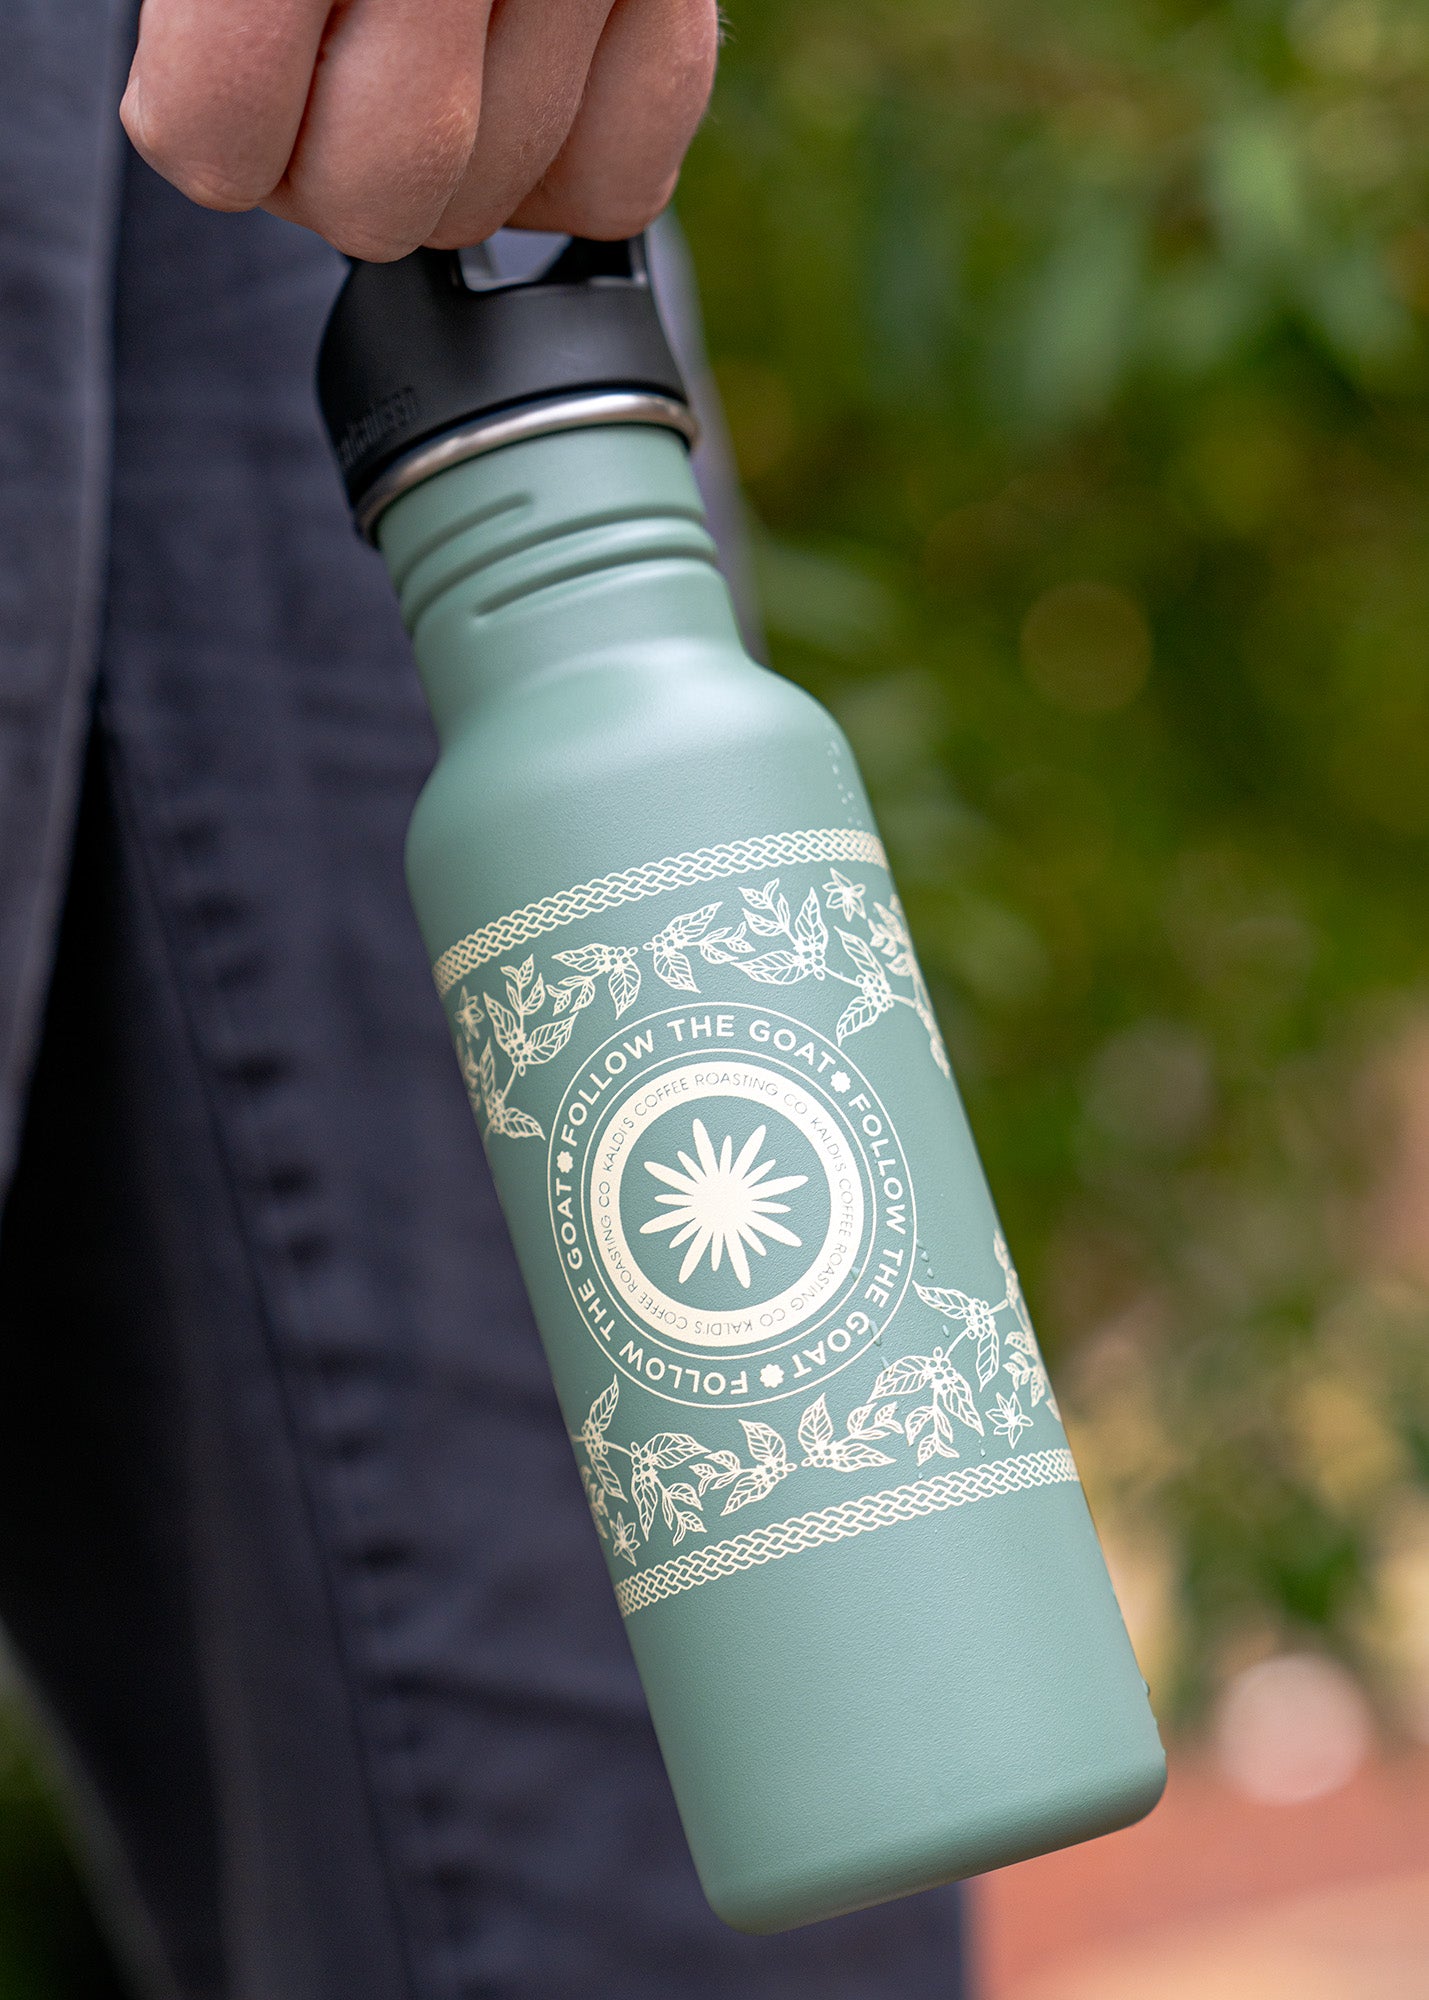 Klean Kanteen Stainless Steel Water Bottle -- every purchase